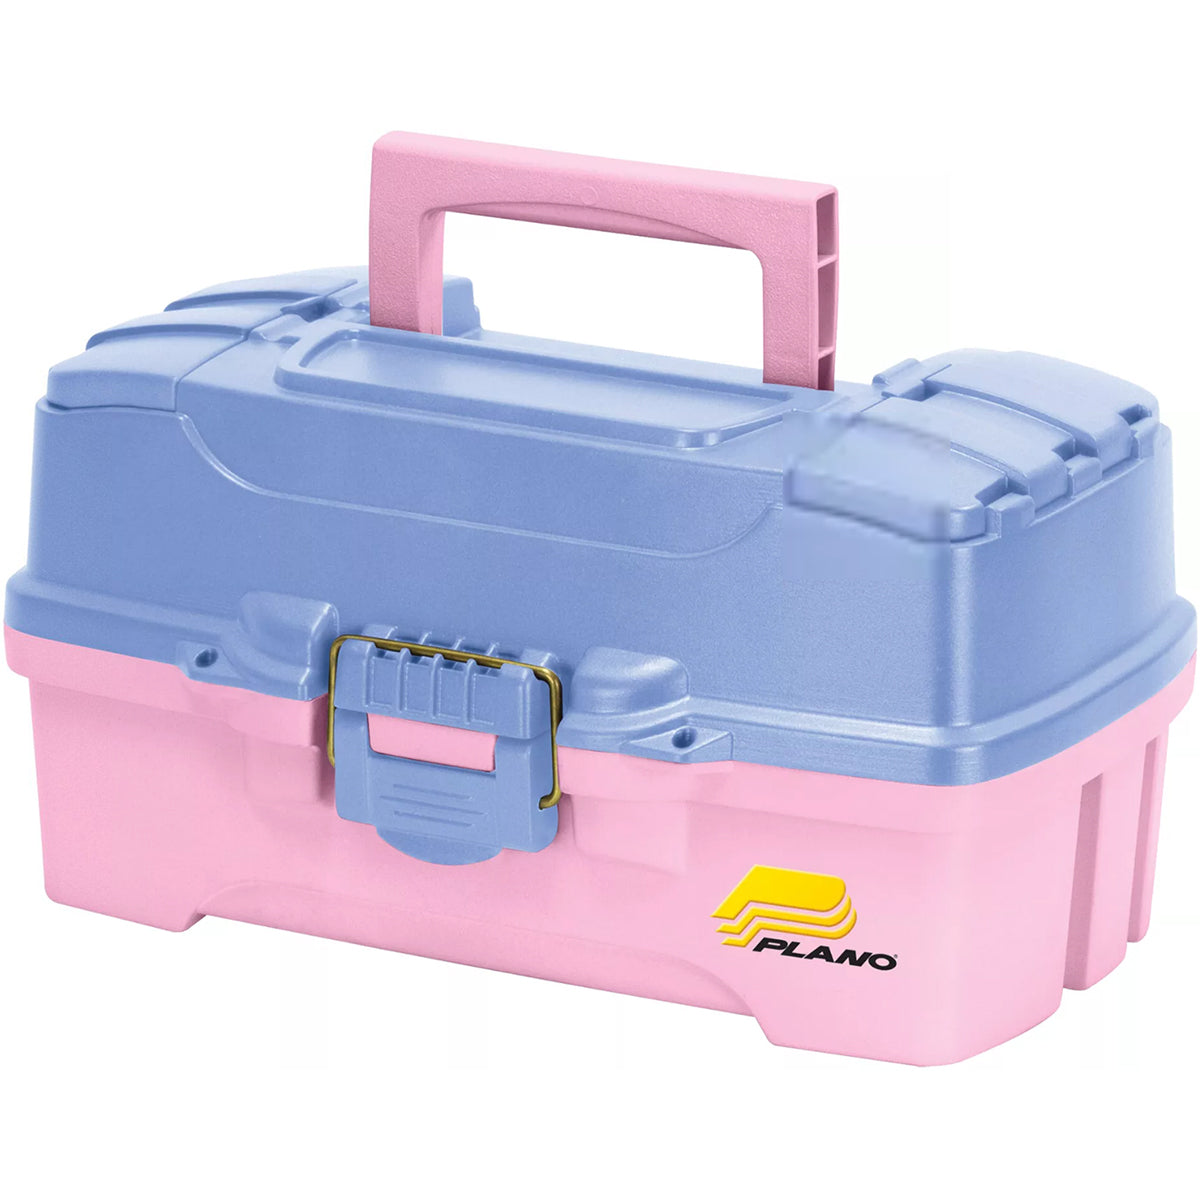 Plano Two Tray Fishing Tackle Box - Model: 6202-92 - Pink/Periwinkle Plano